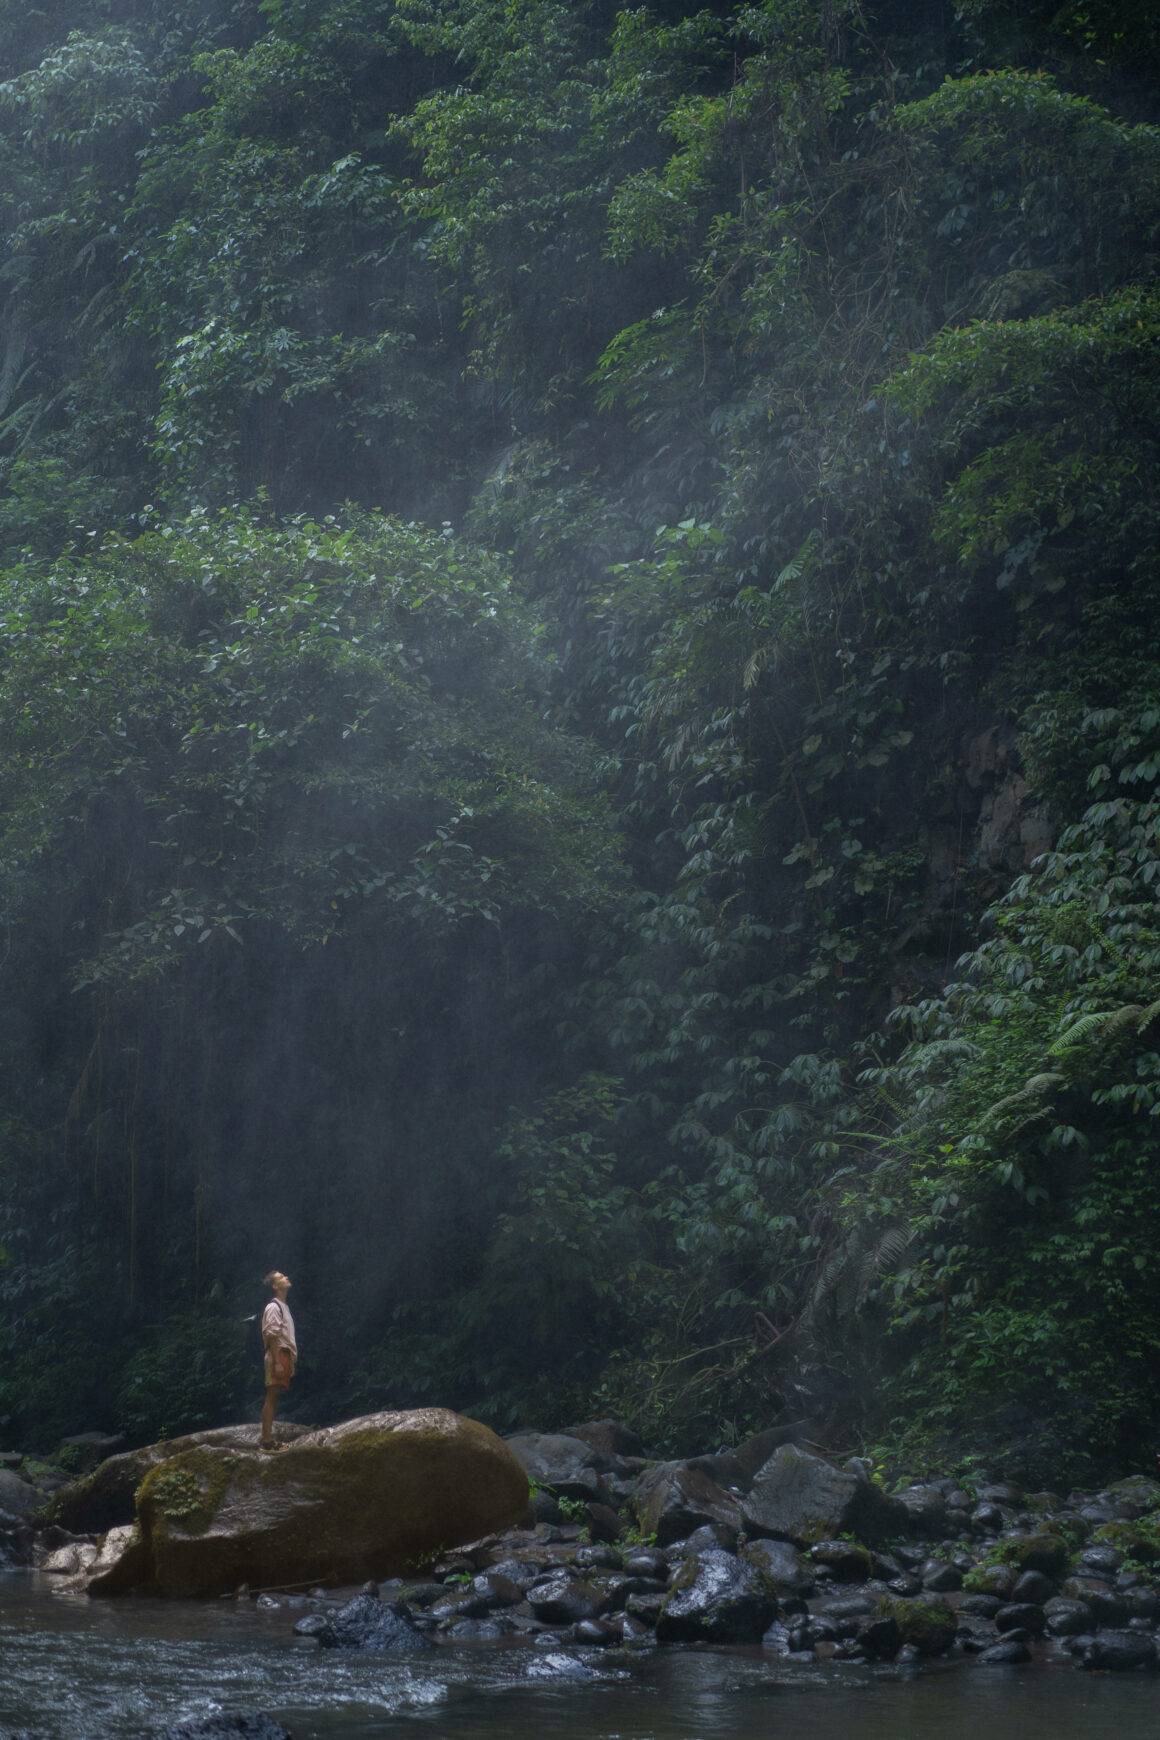 IMAGO / Cavan Images | Woman traveler stands on a rock in the jungle, gazing at a majestic waterfall in Ubud, Bali, Indonesia. September 2, 2024.